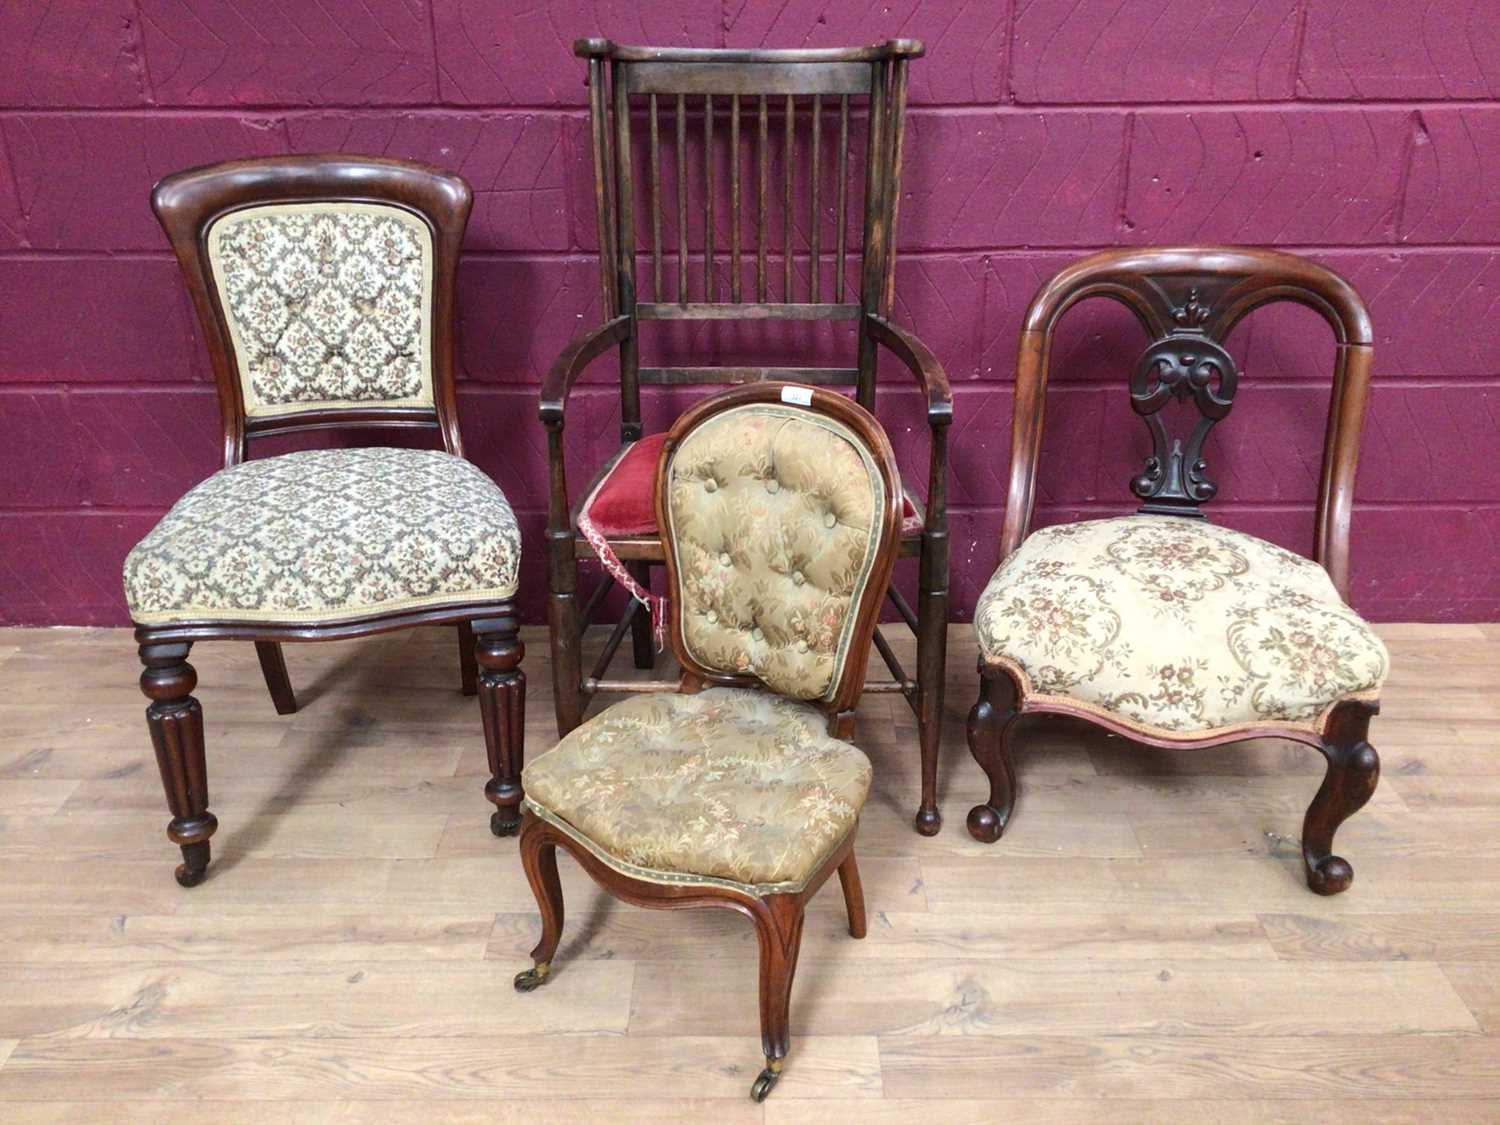 Victorian childs chair, together with two Victorian chairs, Mackintosh style stick back chair